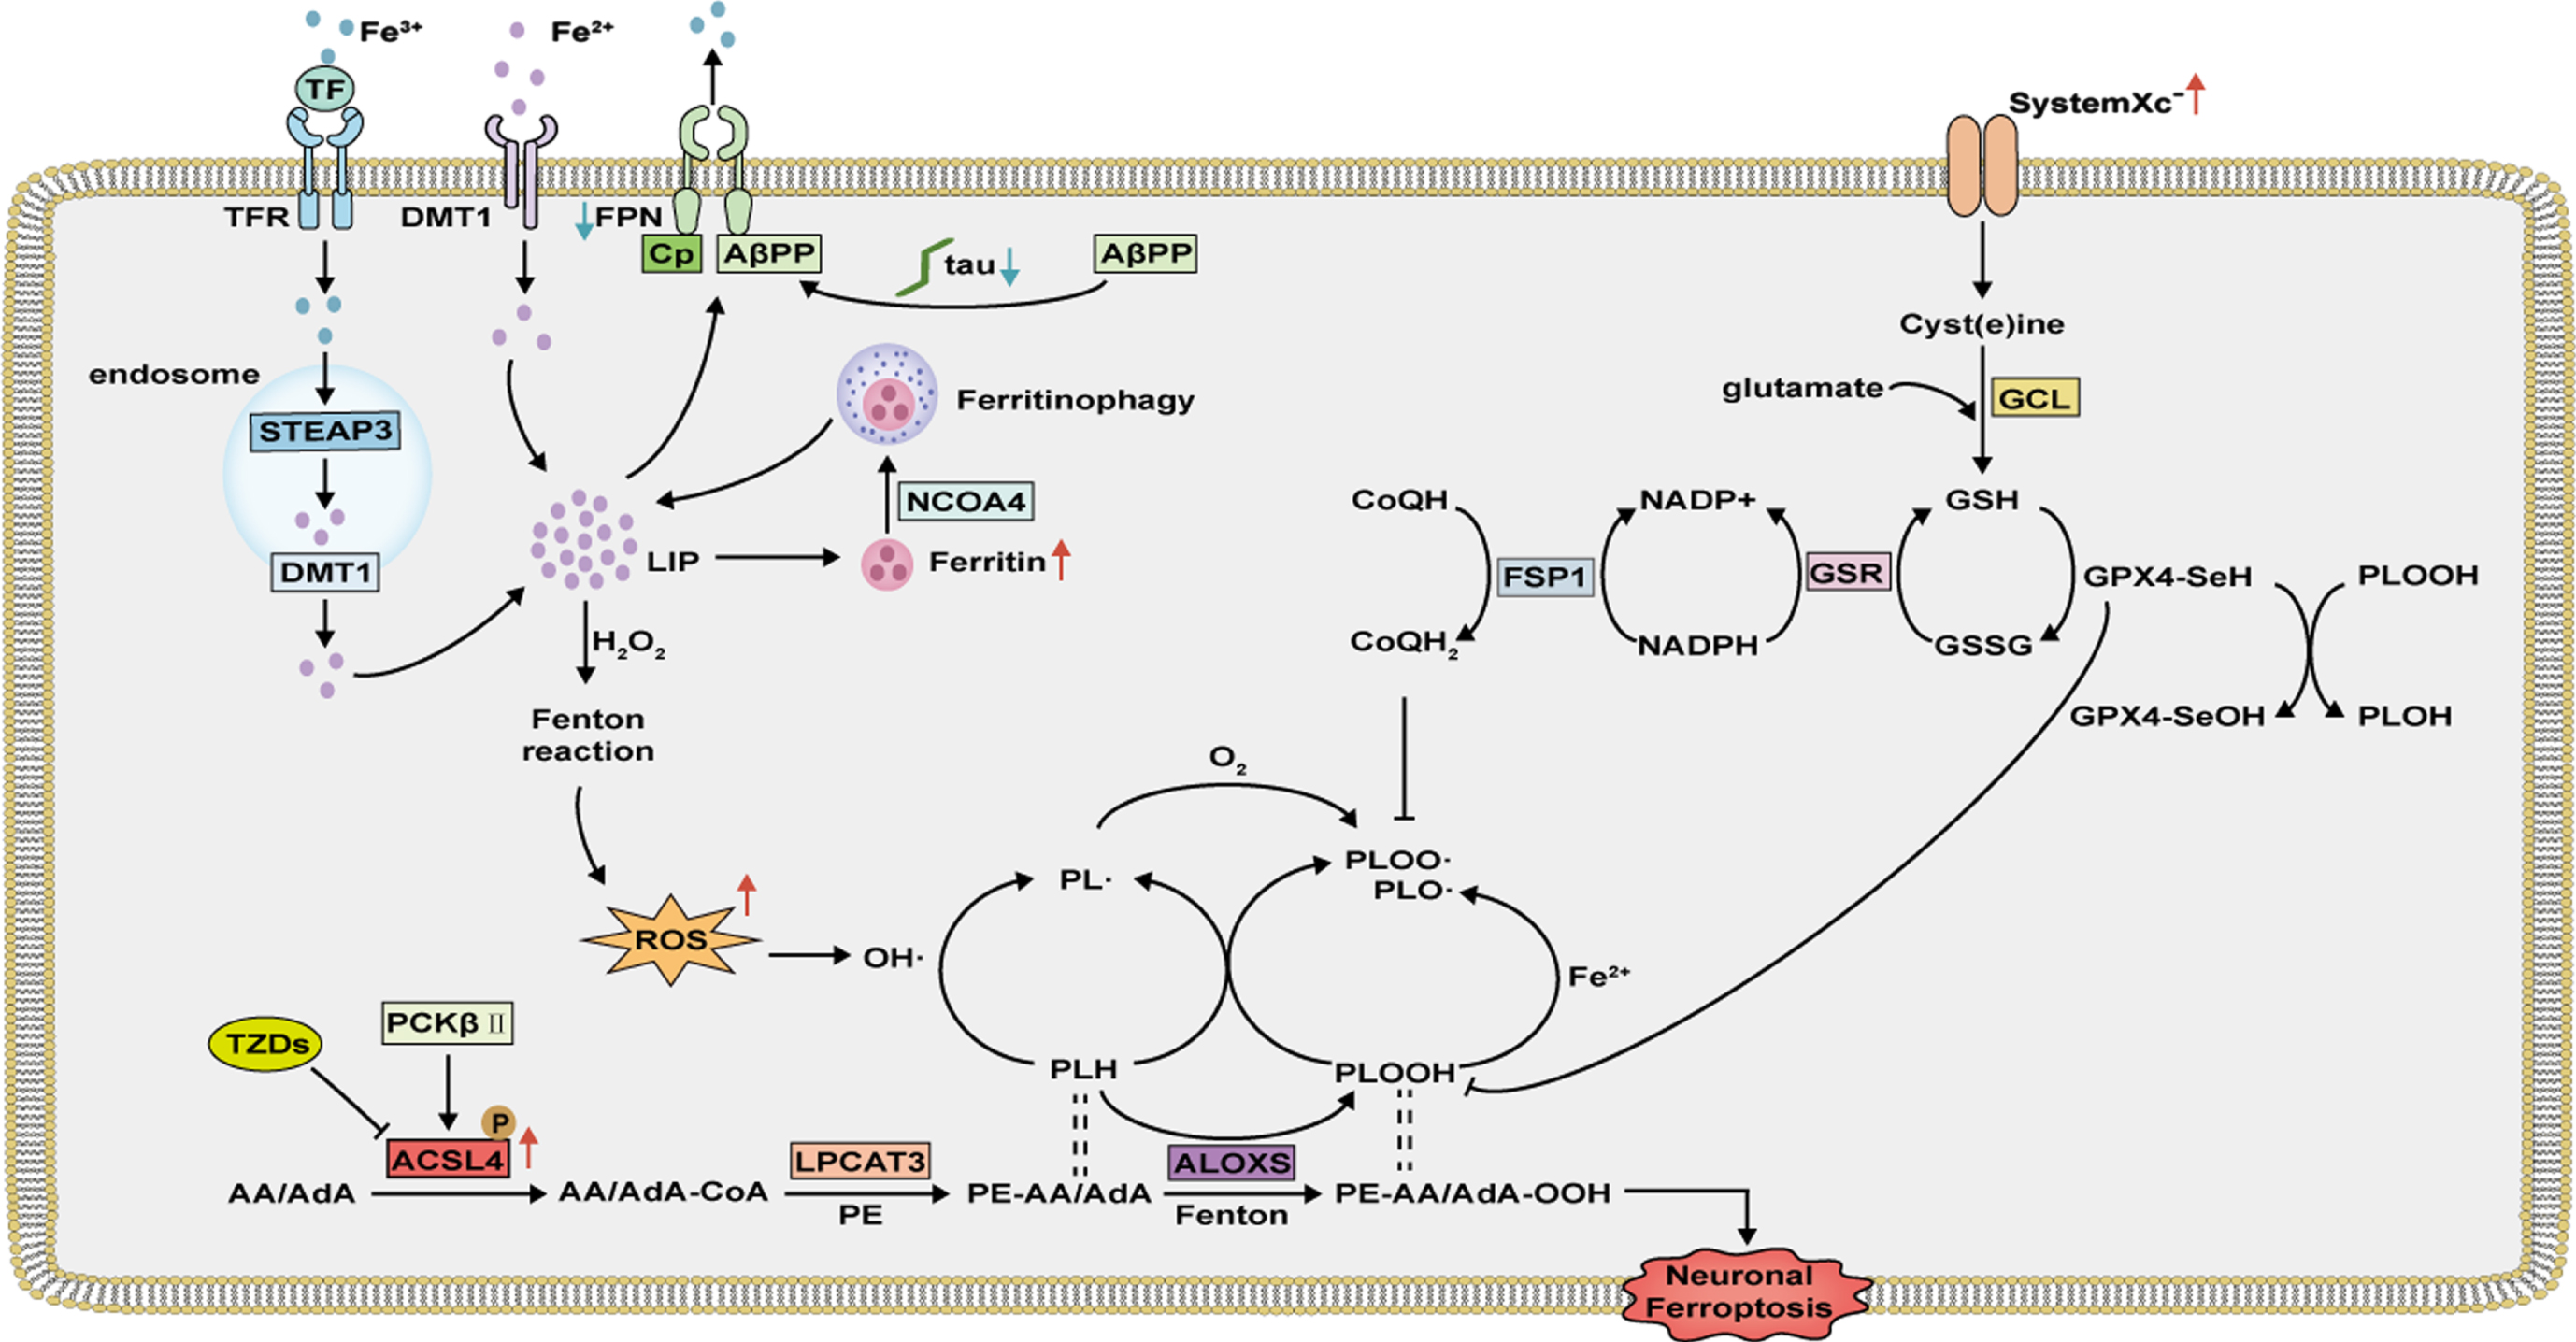 Neuronal ferroptosis mechanism in AD. Overexpressed ACSL4 is activated and catalyzes AA/AdA to AA/AdA-CoA, which is then esterified to PE by LPCAT3. Decreased iron export and increased expression of ferritin promote neuronal iron accumulation. Fe2 + in LIP, via the Fenton reactions or ALOXs, catalyzes the production of phospholipid hydroperoxides (PLOOH) and phospholipid radicals (PL•, PLO•, and PLOO•), leading to neuronal ferroptosis. Neuronal ferroptosis can be prevented by cyst(e)ine–GSH–GPX4 axis and NADH-FSP1-CoQ10 axis.